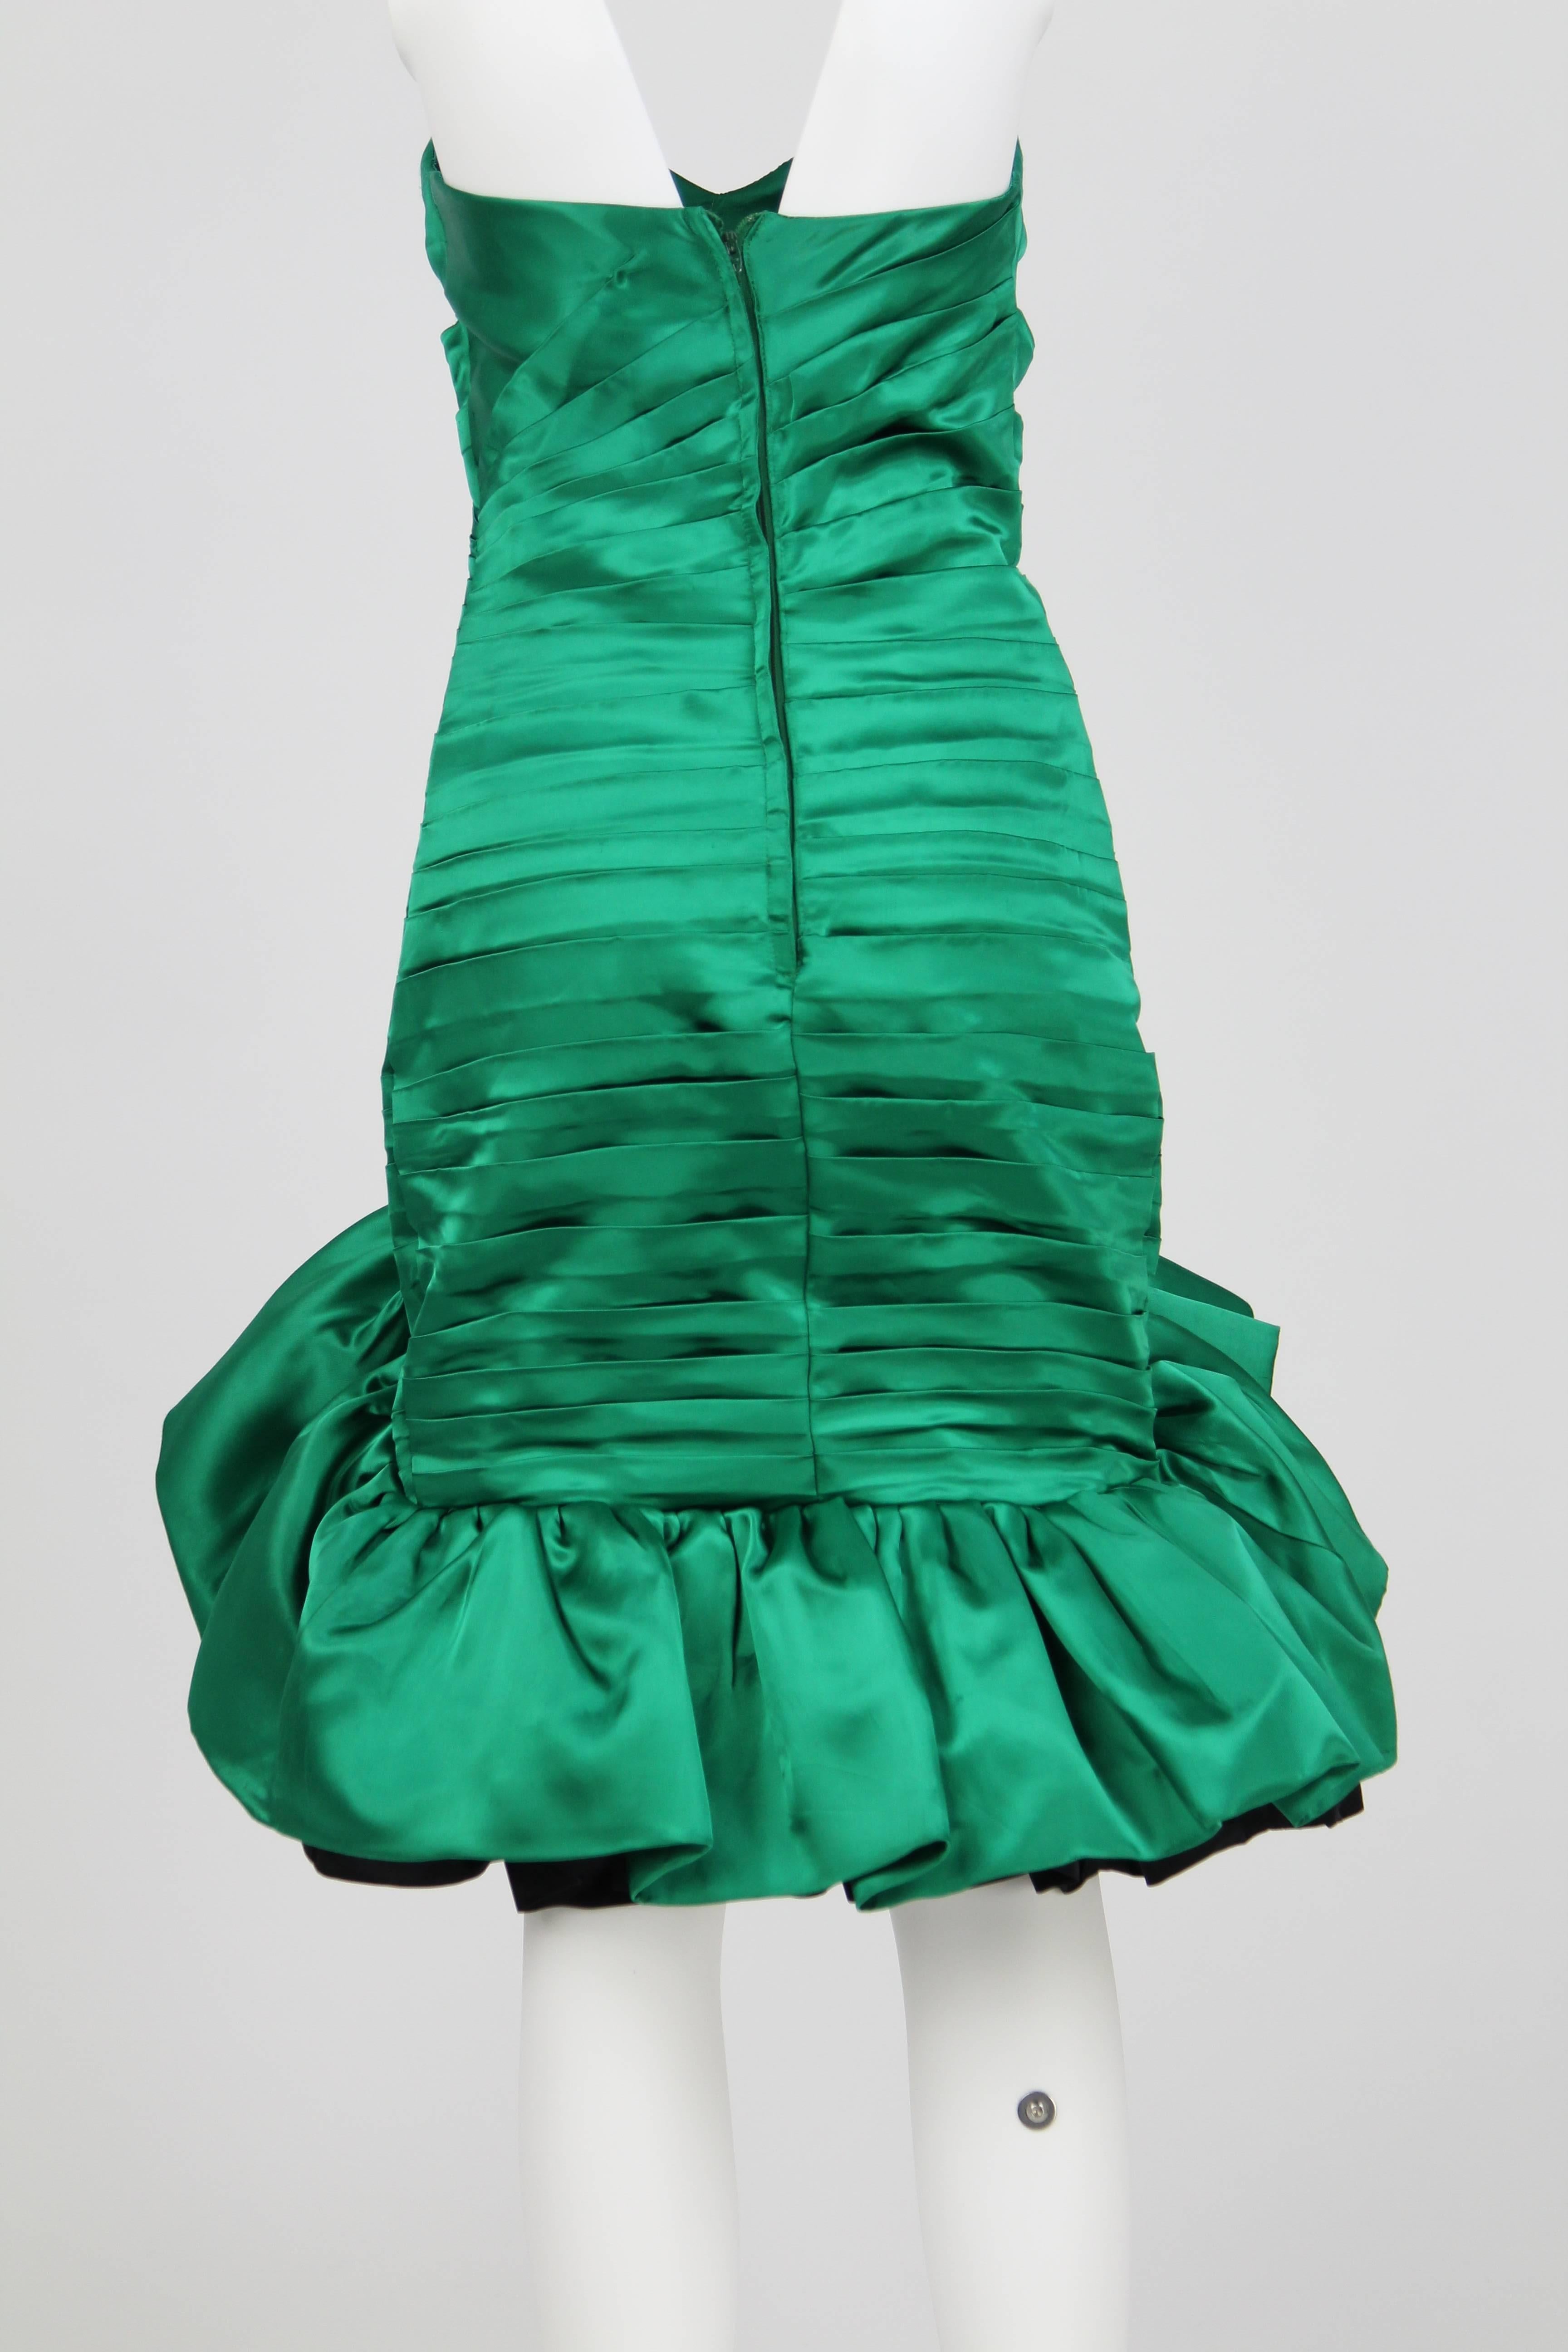 Artisanal pleated and draped green Mini Dress featuring a black dropped puff hem and strapeless heart neckline.
This dress was handmade in 1980s.
The conditions of this piece are excellent.
The size is 40 IT.